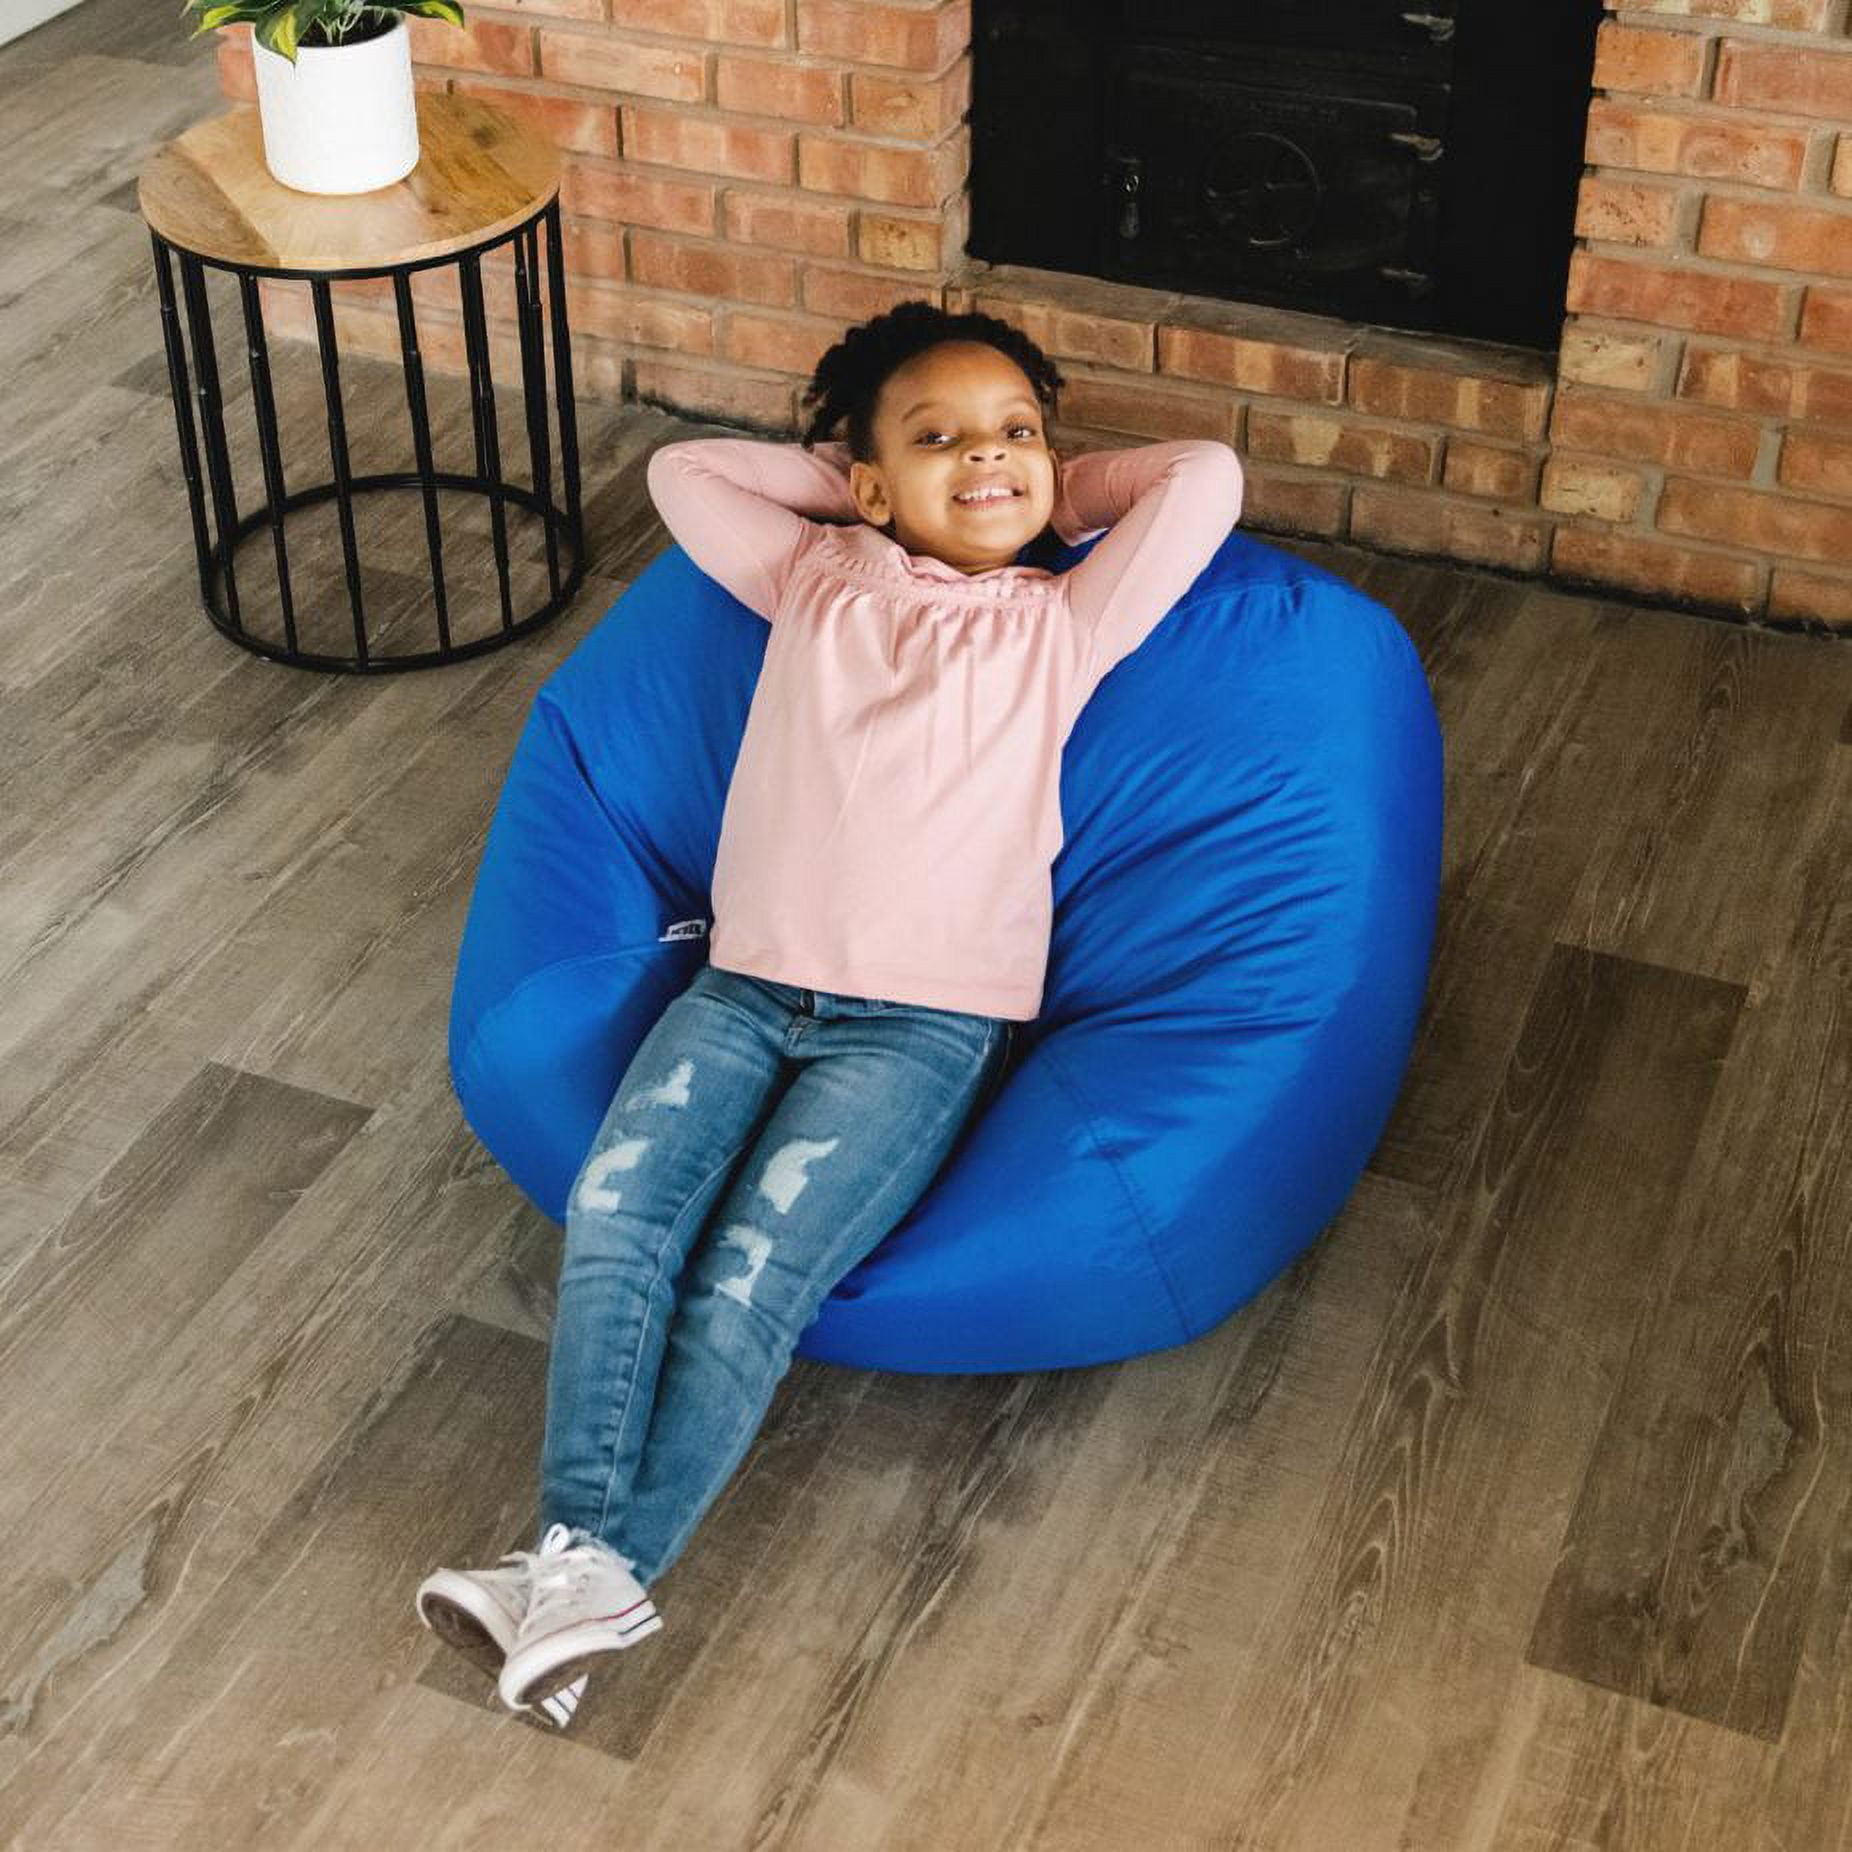 Amazon.com: Sofa Sack - Plush, Ultra Soft Bean Bag Chair - Memory Foam Bean  Bag Chair with Microsuede Cover - Stuffed Foam Filled Furniture and  Accessories For Dorm Room - Charcoal 4' :